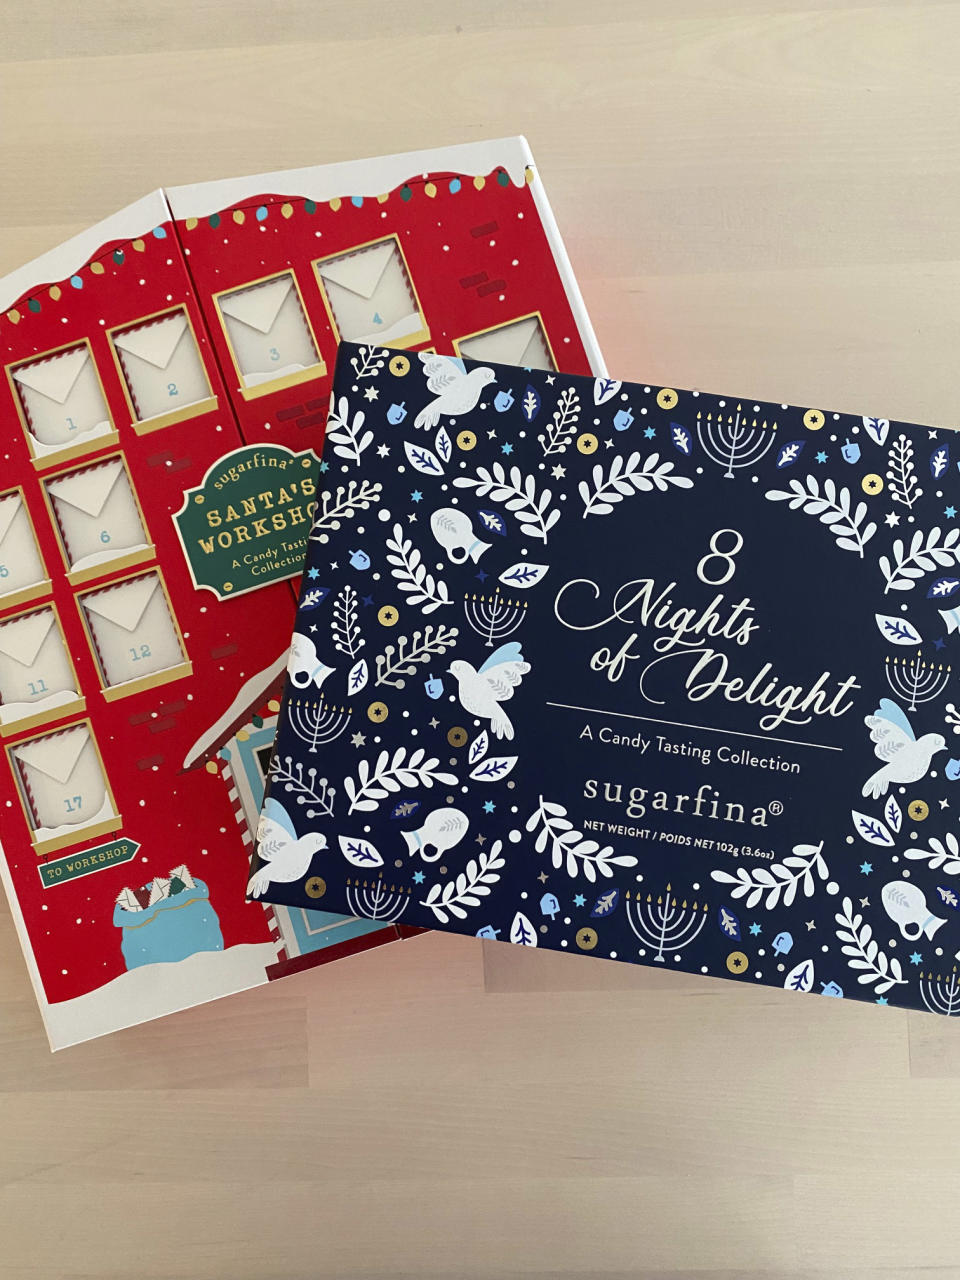 This image shows two advent calendar offerings by Sugarfina, one in the guise of Santa’s Workshop, left, and 8 Nights of Delight- Hanukkah Candy Tasting Collection reveals a new kosher-certified candy. (Katie Workman via AP)